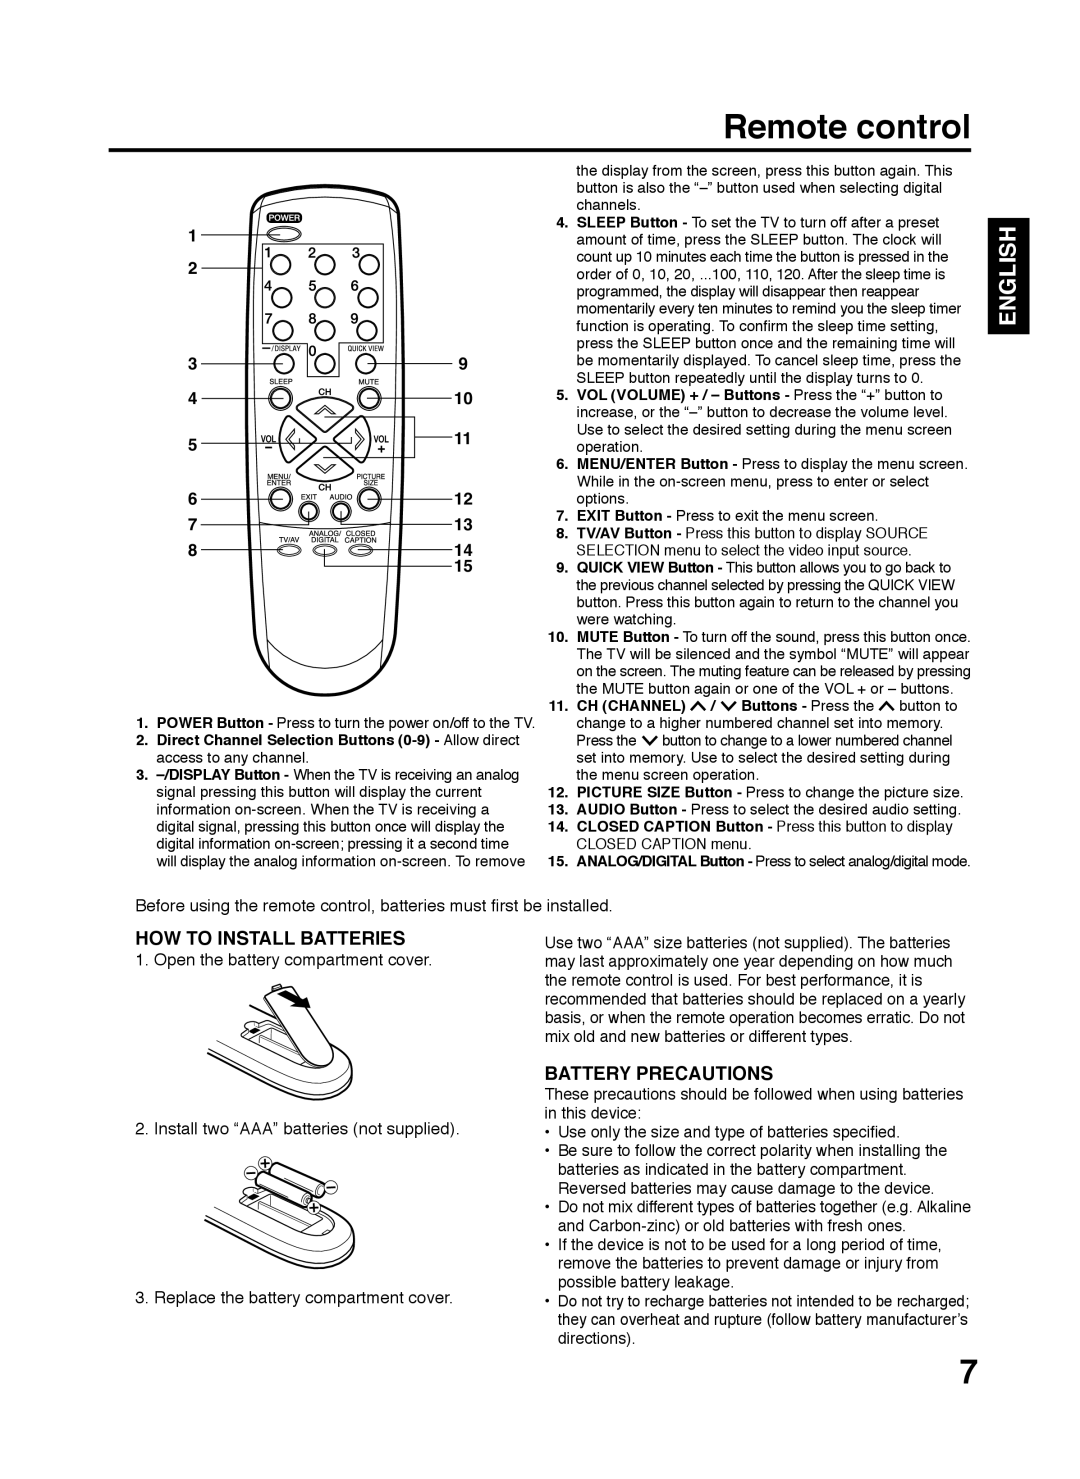 Zenith C27H26B, S2898A, 206-3923 warranty Remote control, English, How To Install Batteries, Battery Precautions 